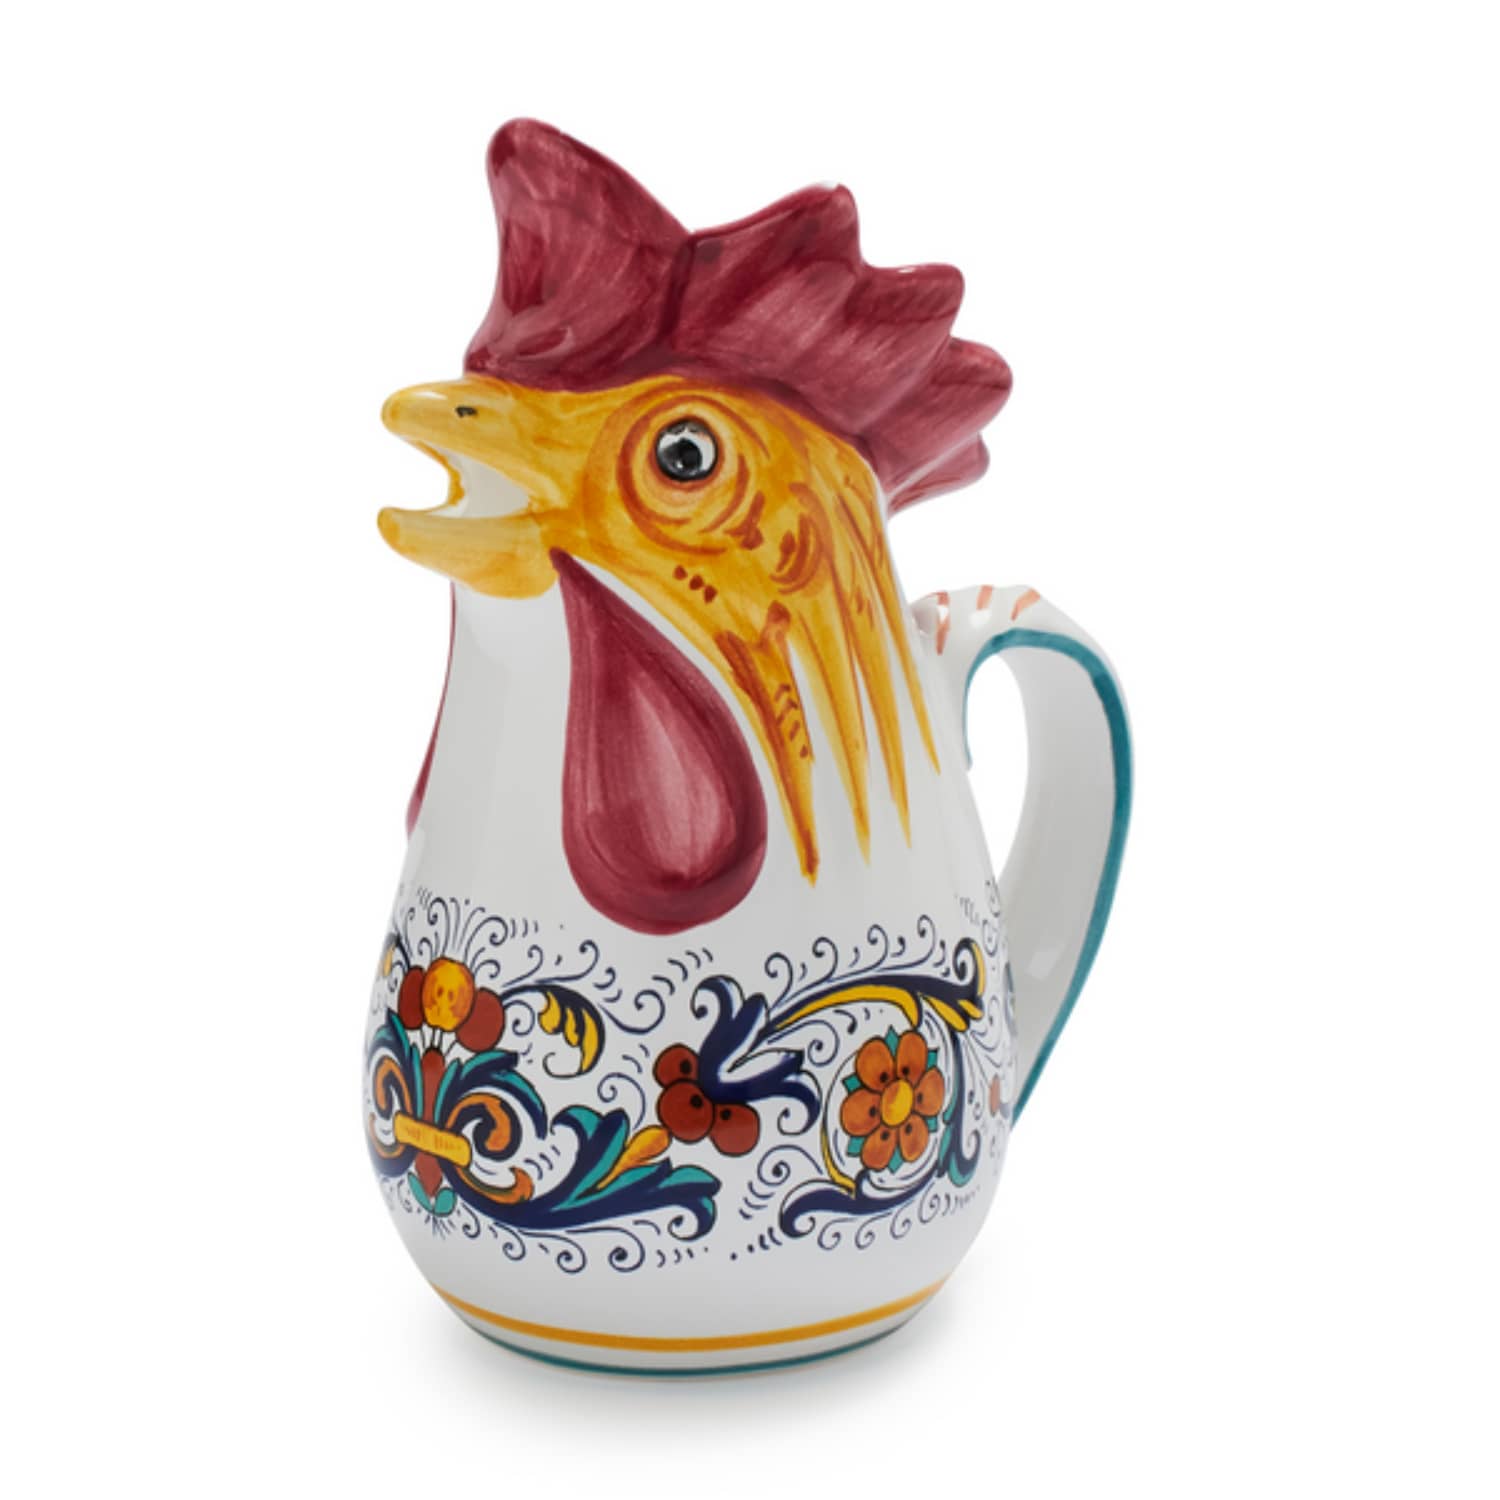 Rooster Decor Is Back in Style — Here's What to Shop